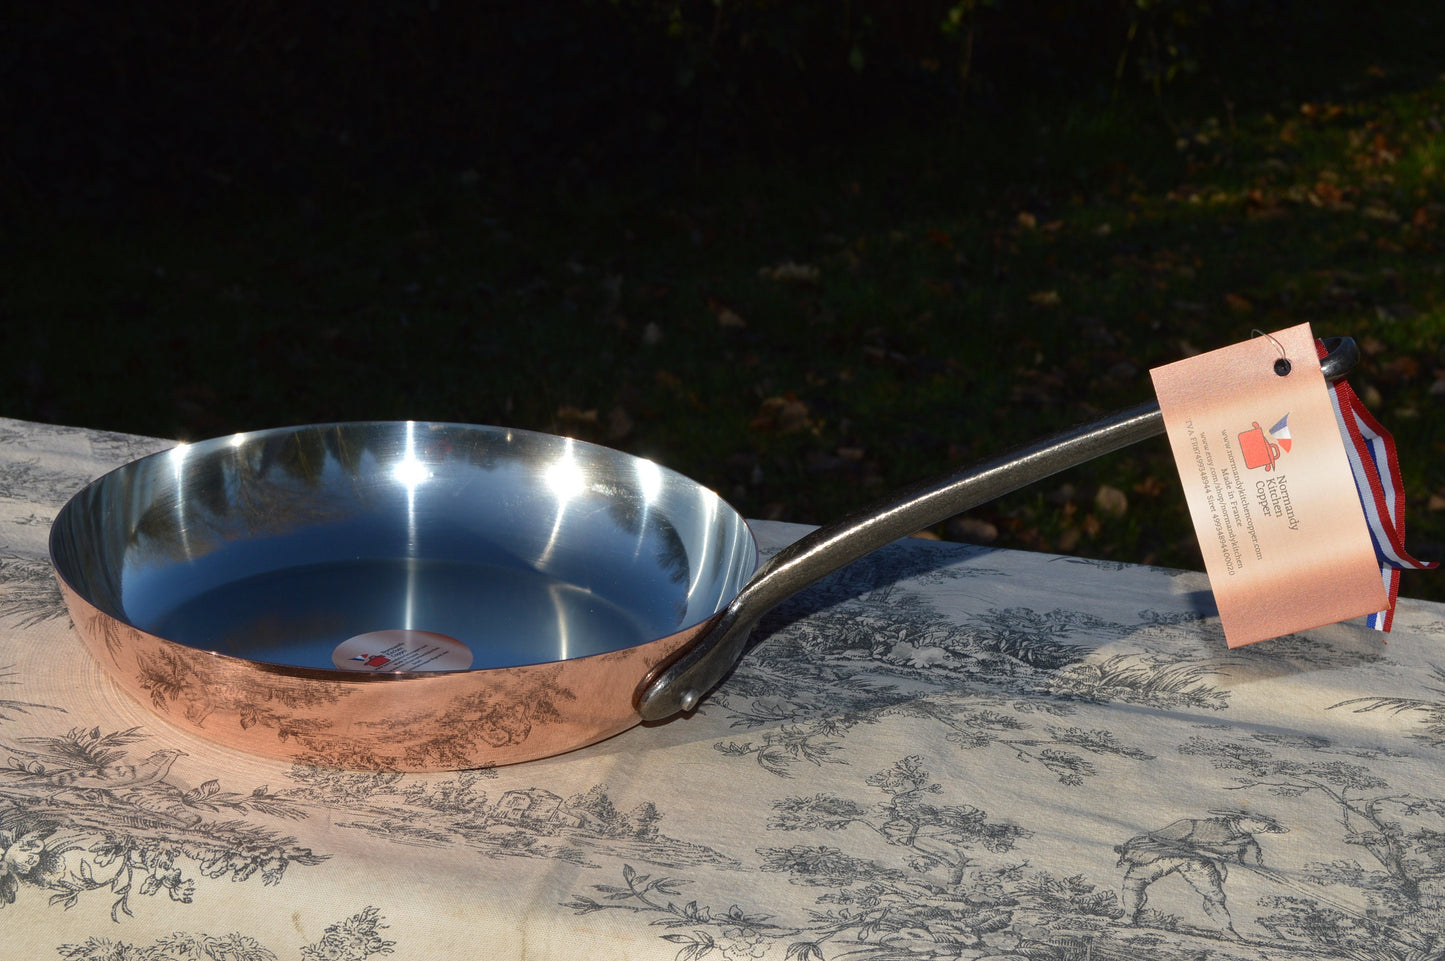 New NKC 24cm Copper Fry Pan Skillet Normandy Kitchen Copper Saute High Sided Saute Pan 9 1/2" Tin lined New Normandy Kitchen Copper 1.3mm